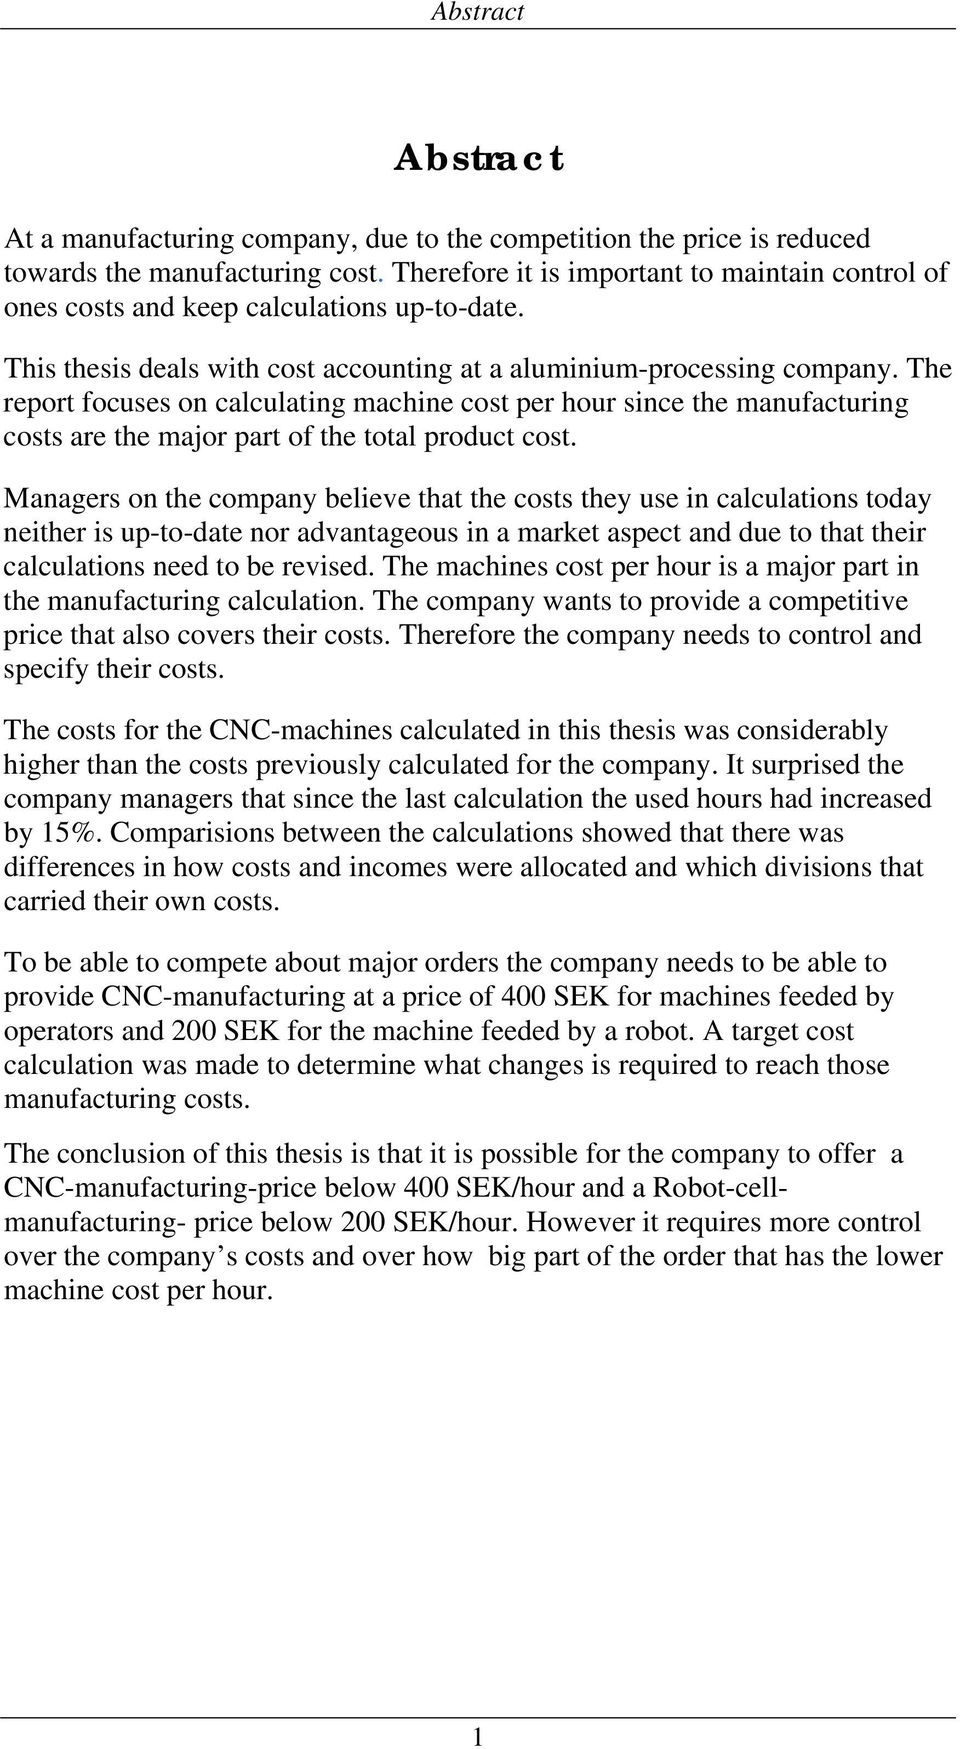 The report focuses on calculating machine cost per hour since the manufacturing costs are the major part of the total product cost.